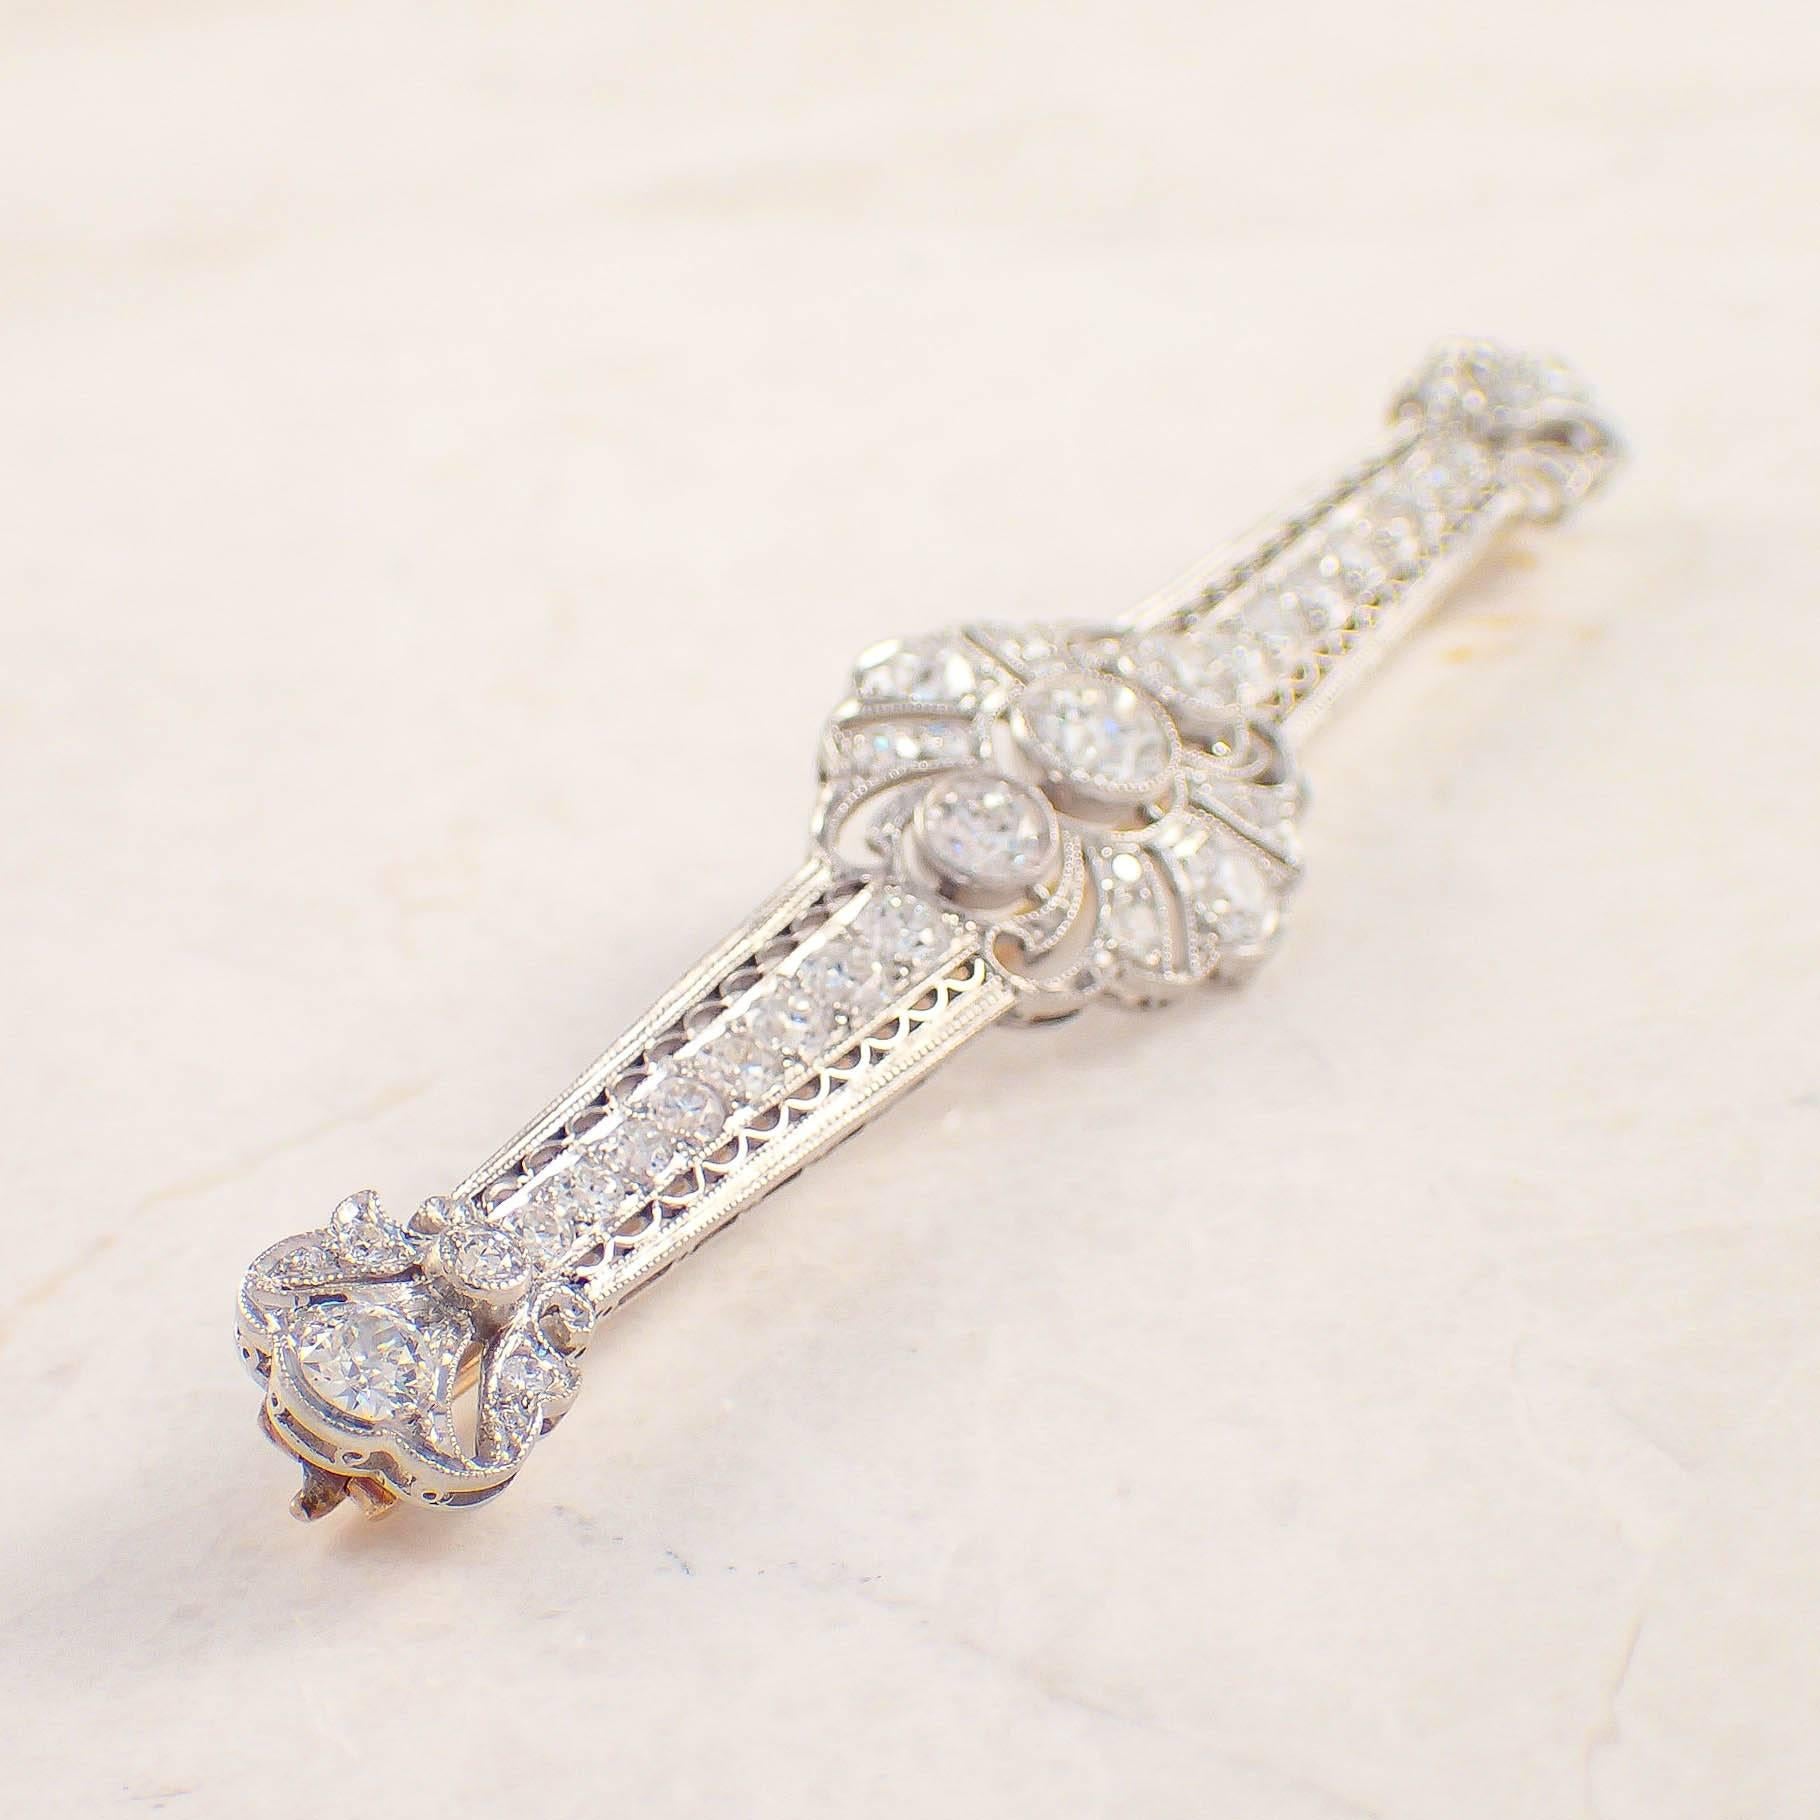 Tiffany & Co. Art Deco platinum diamond bar pin. The open work brooch is set with 41 old European cut diamonds weighing approximately 3.00 carats total. The brooch measures 3 inches and weighs 6.1 DWTs/ 9.4 grams. Stamped 